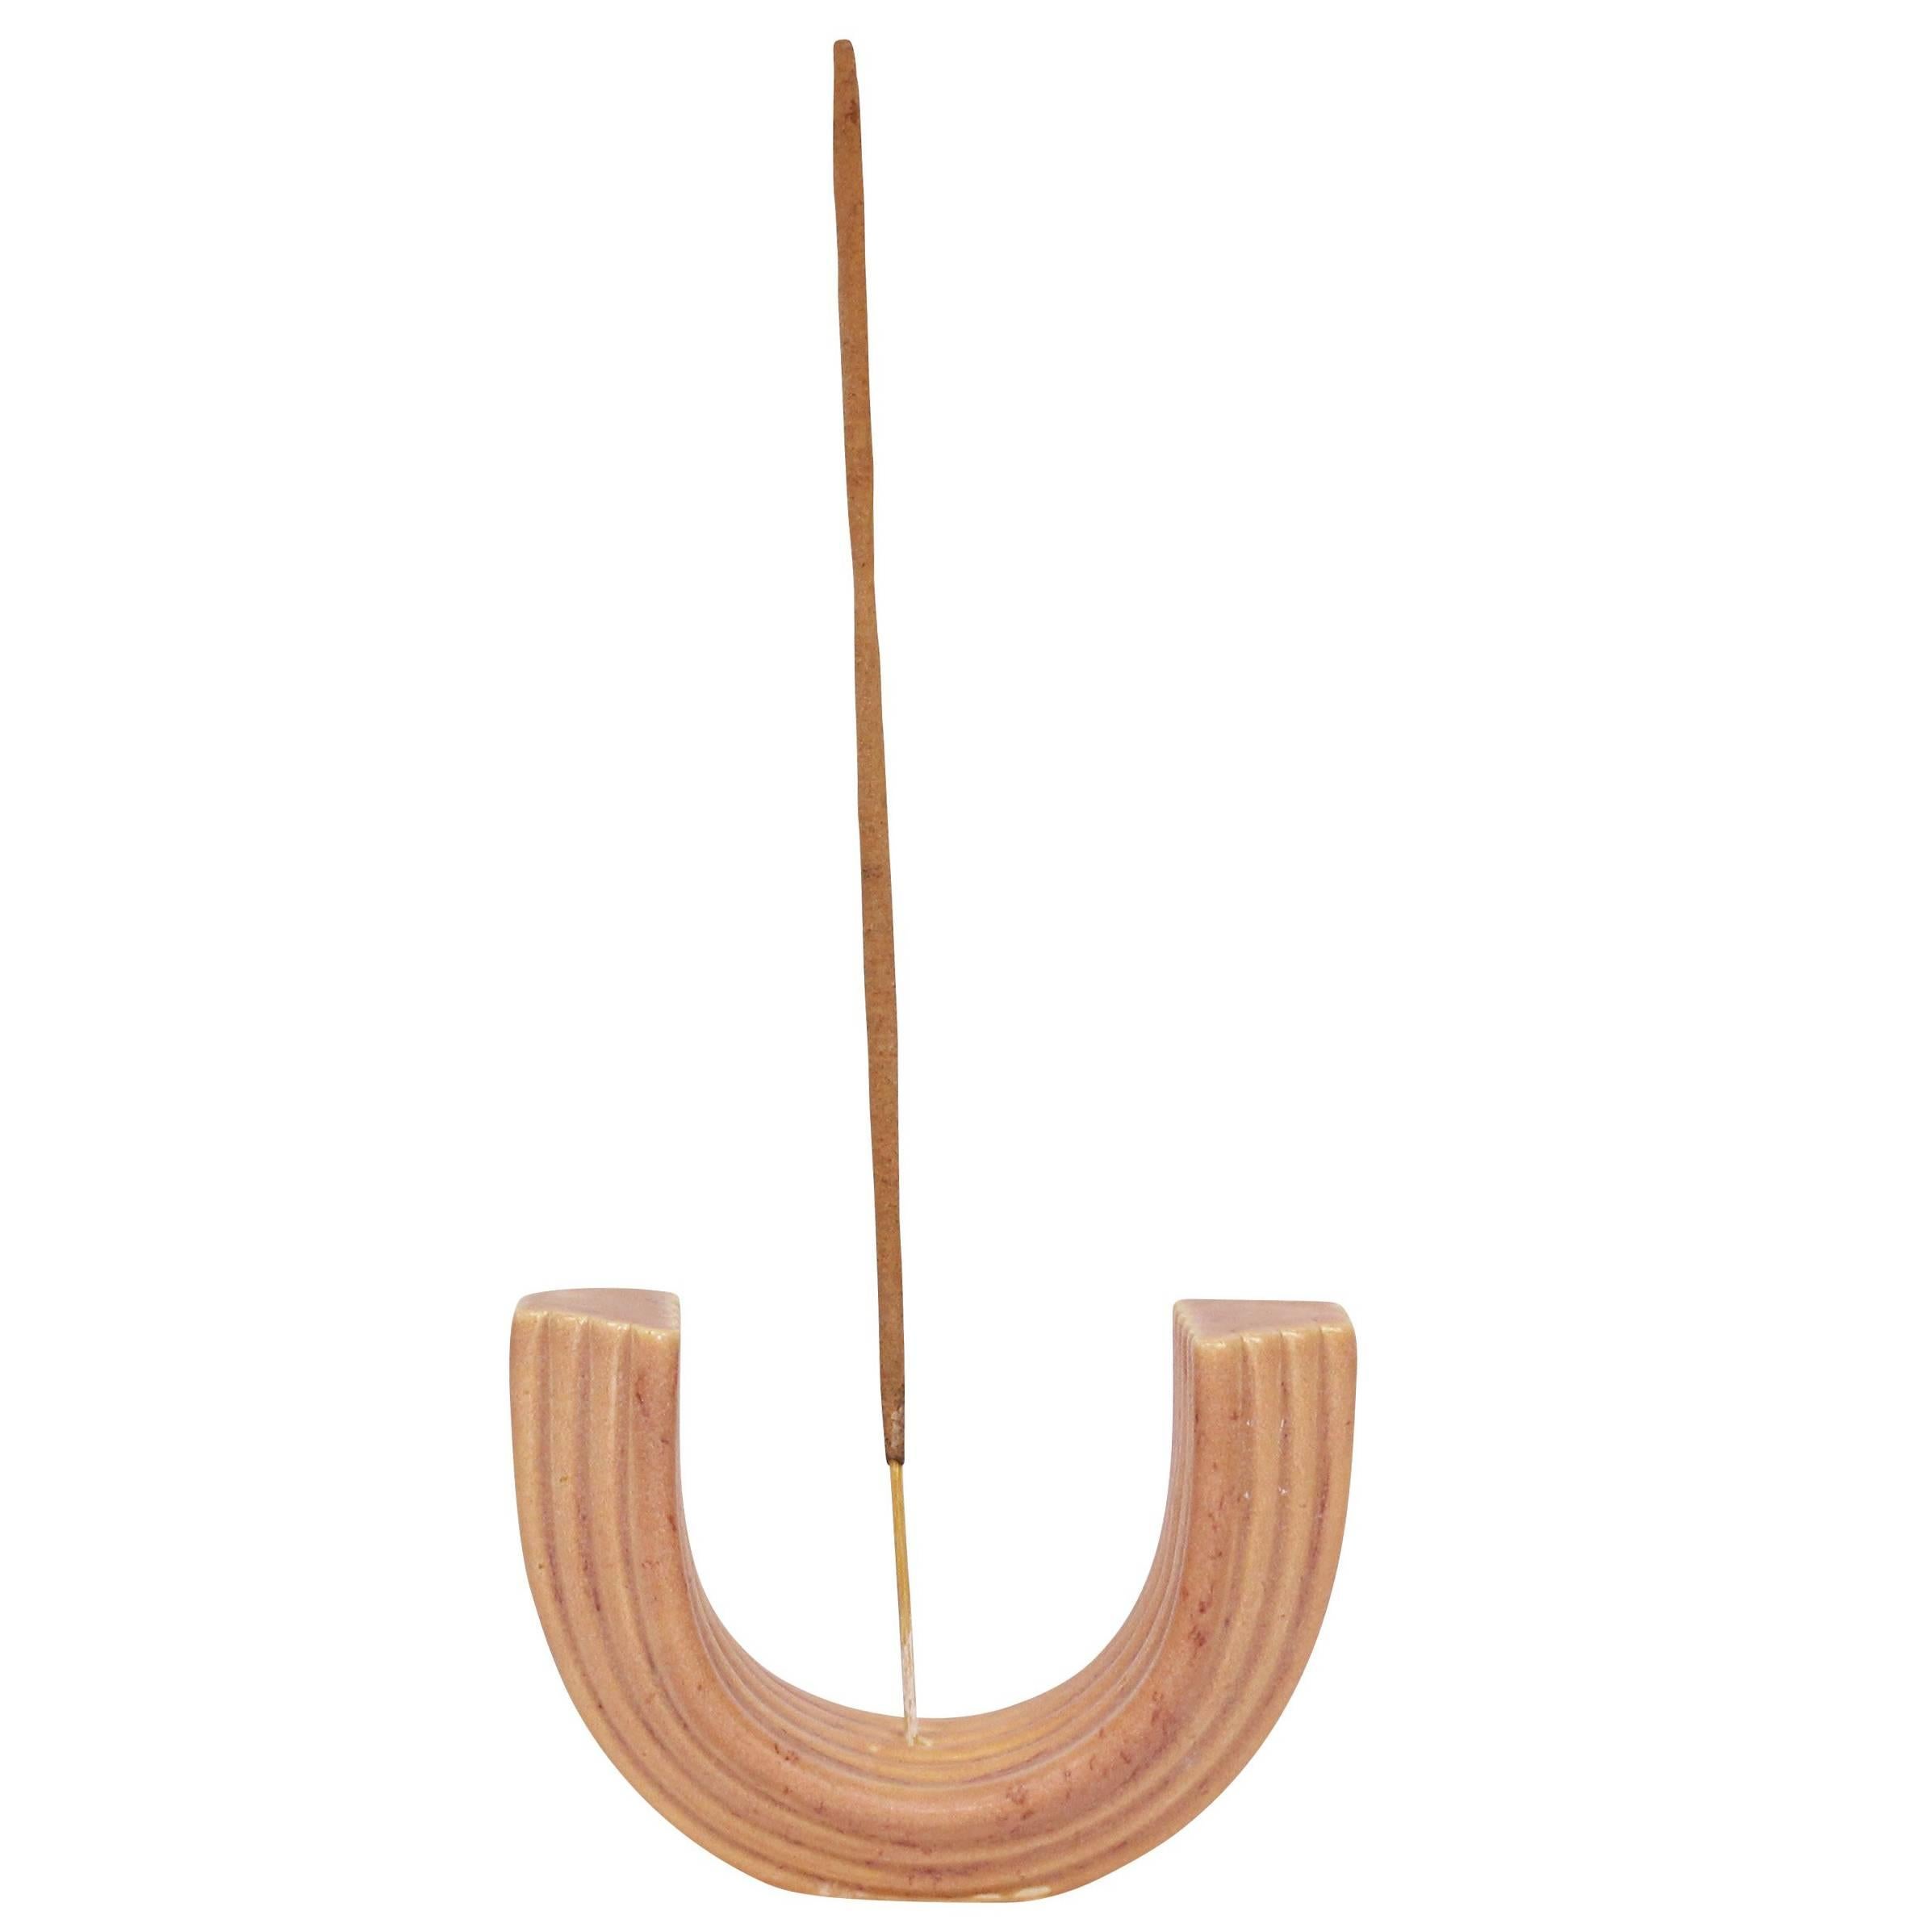 Contemporary Handmade Arch Incense Holder Tabletop - Peach Pink